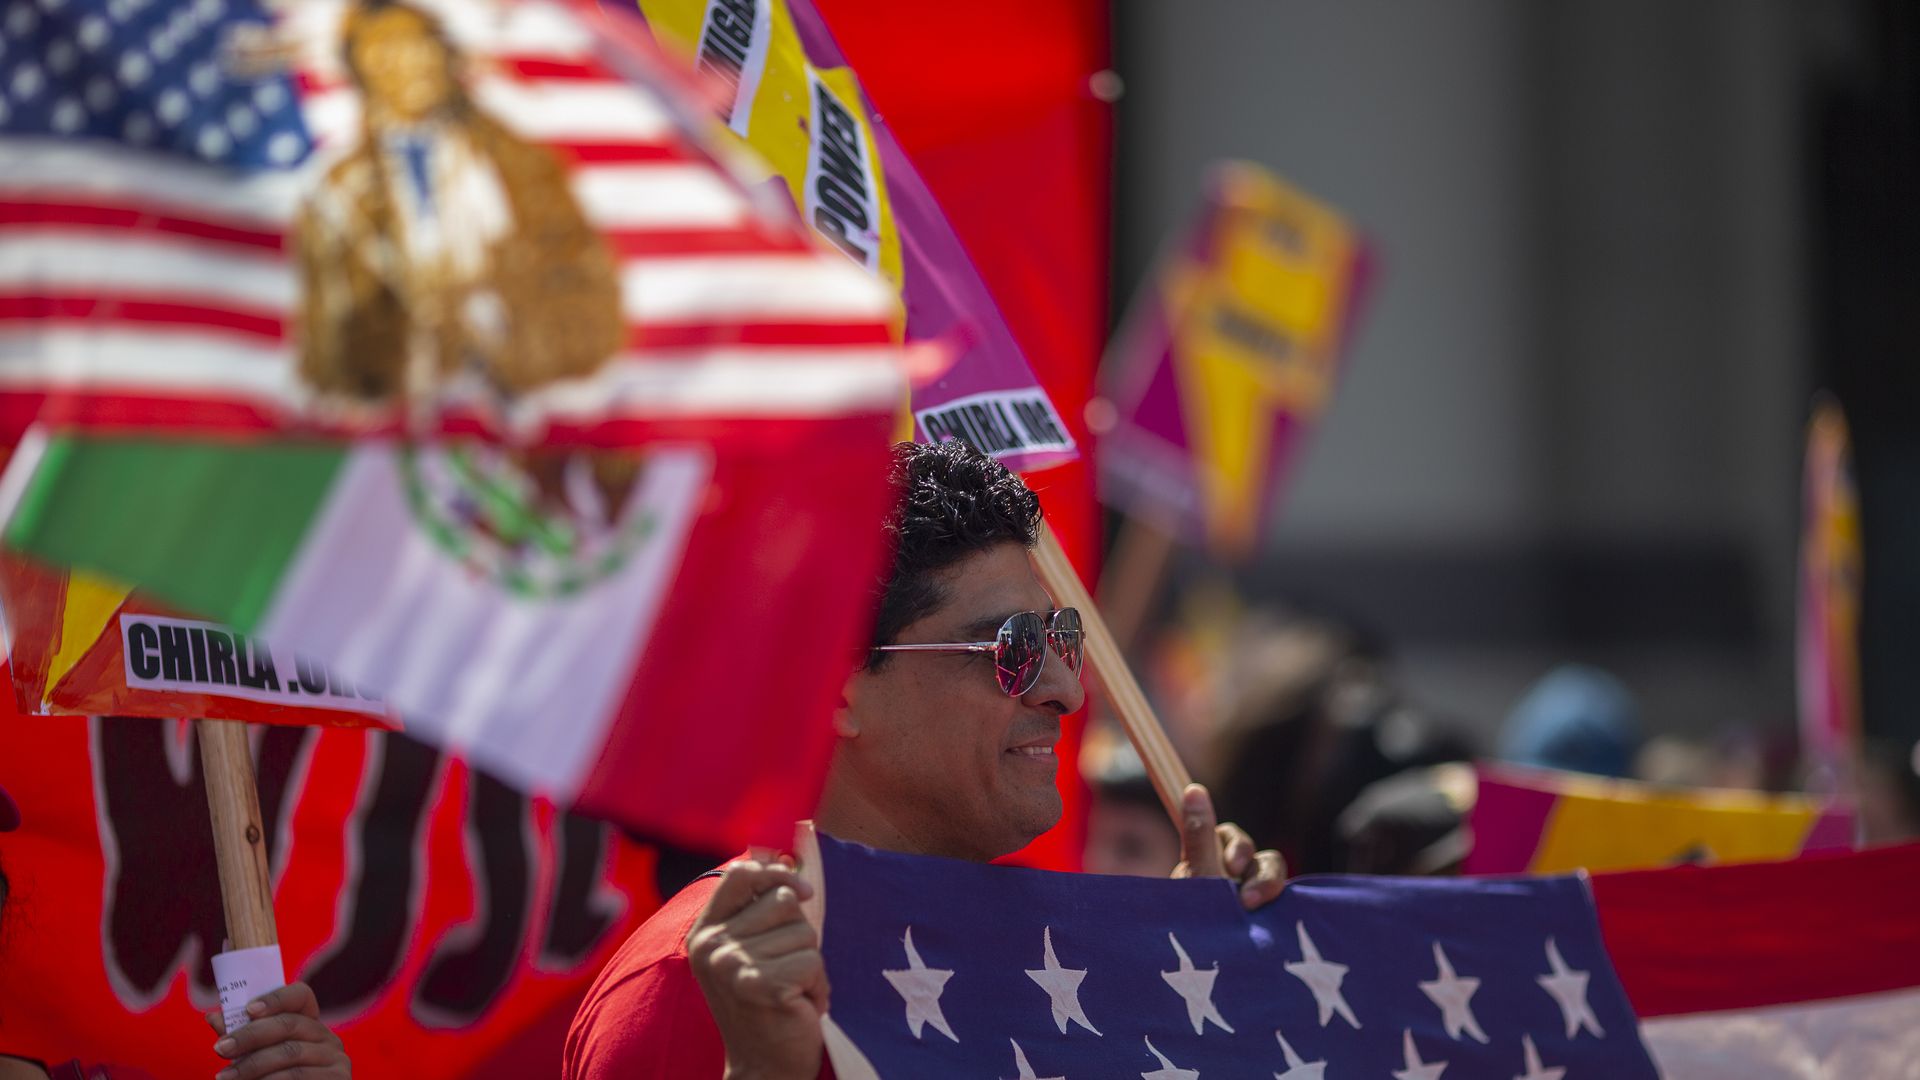 A man holds an American flag during a march on May Day, in Los Angeles, California.